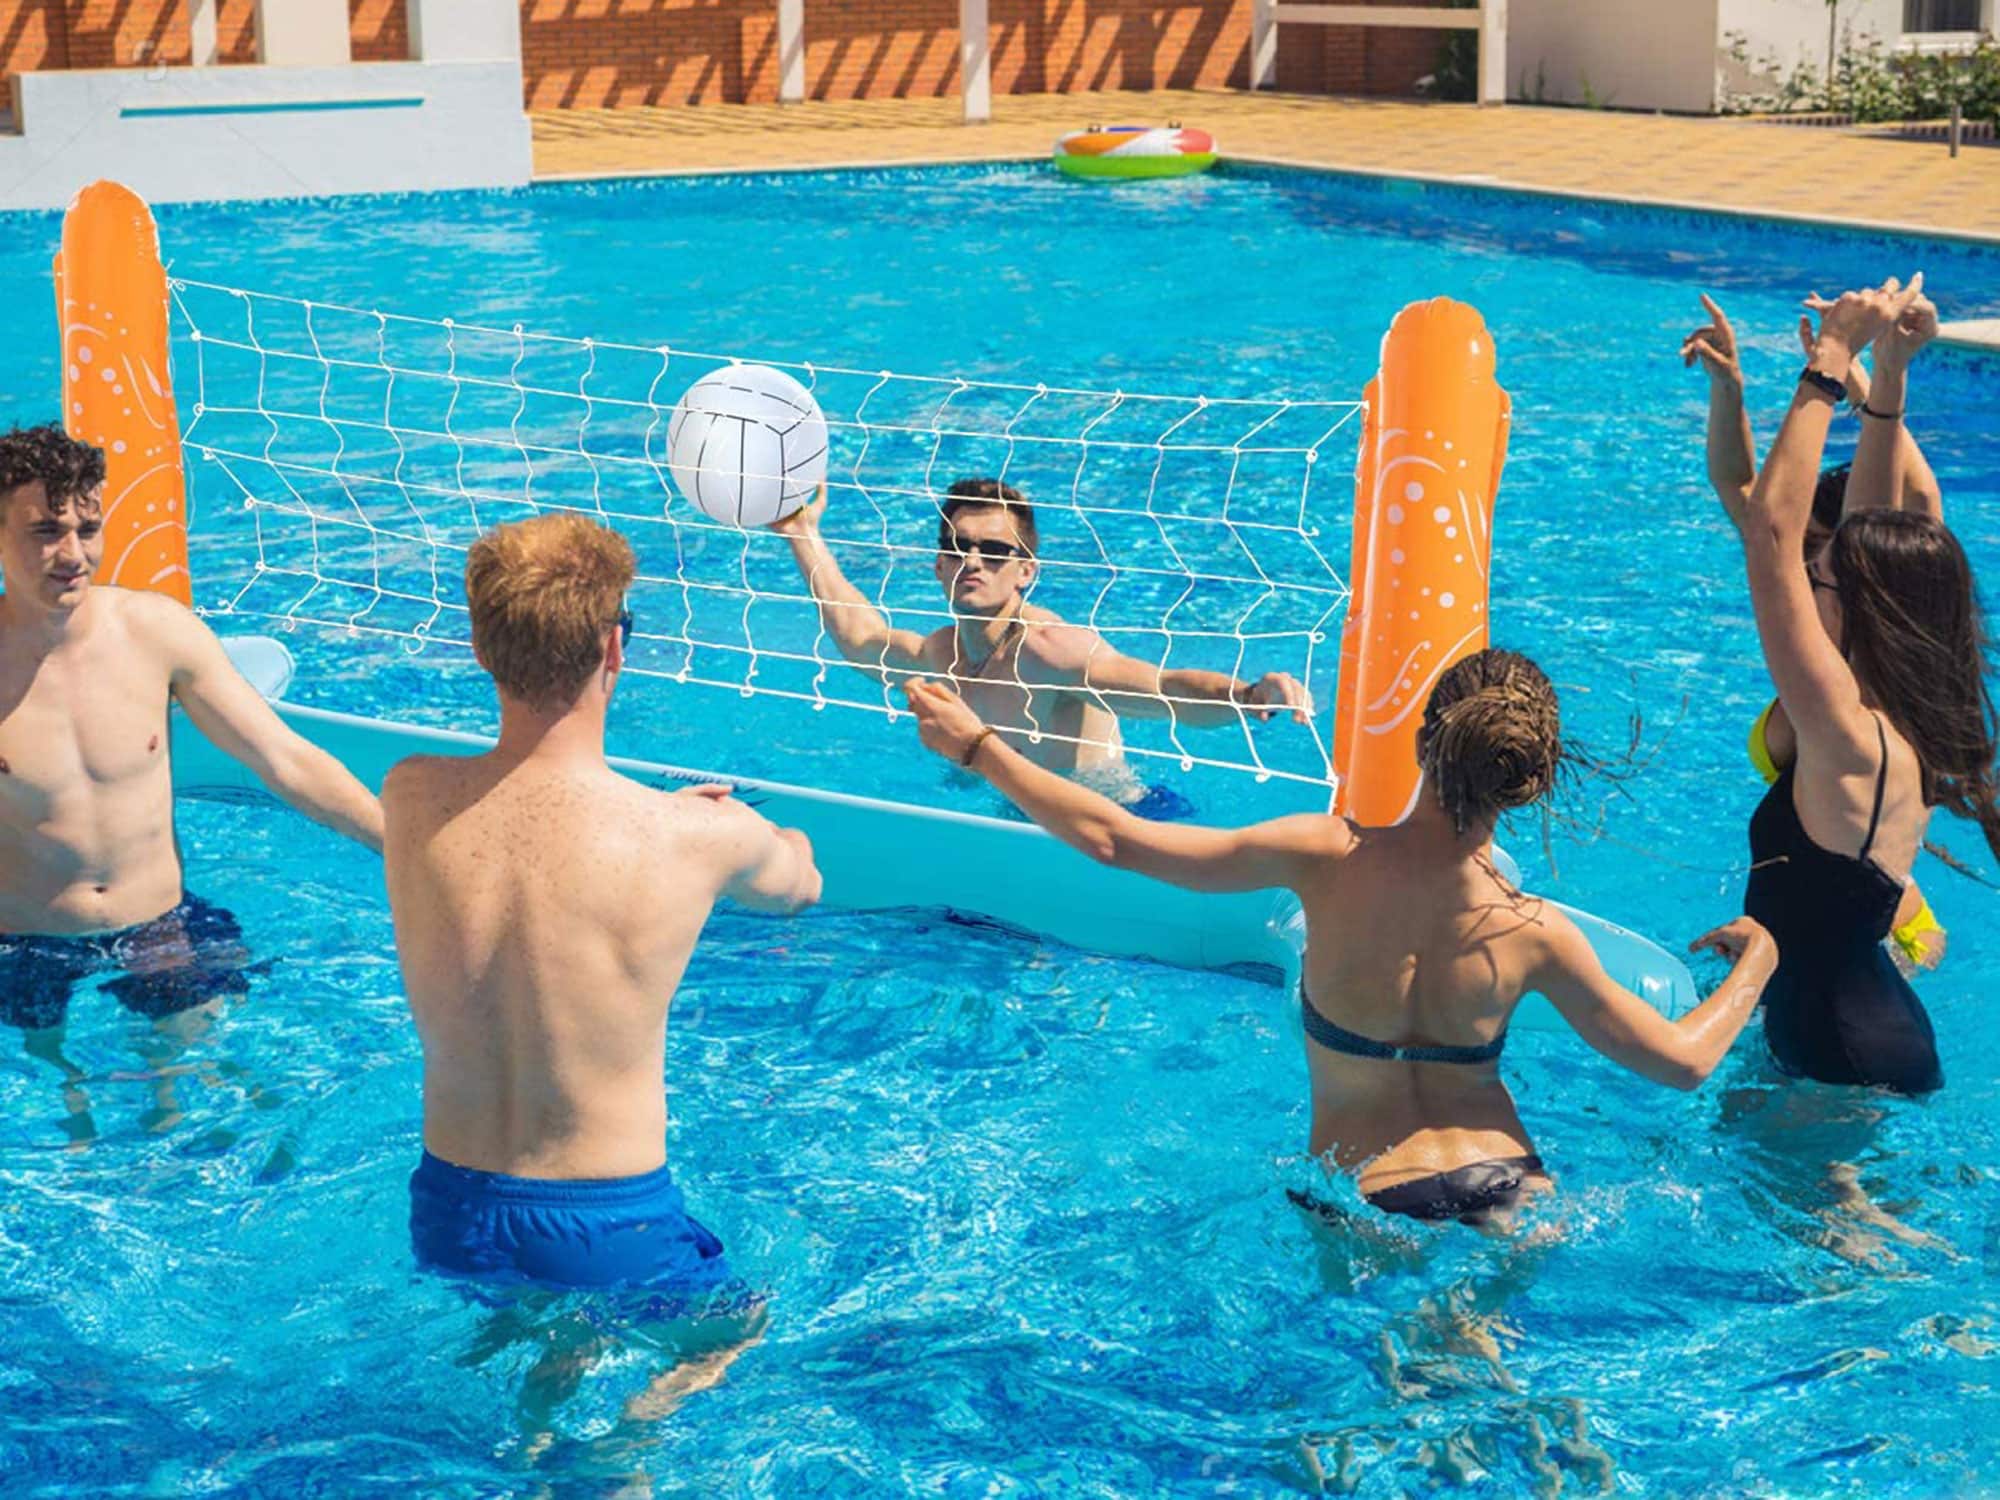 Pool volleyball